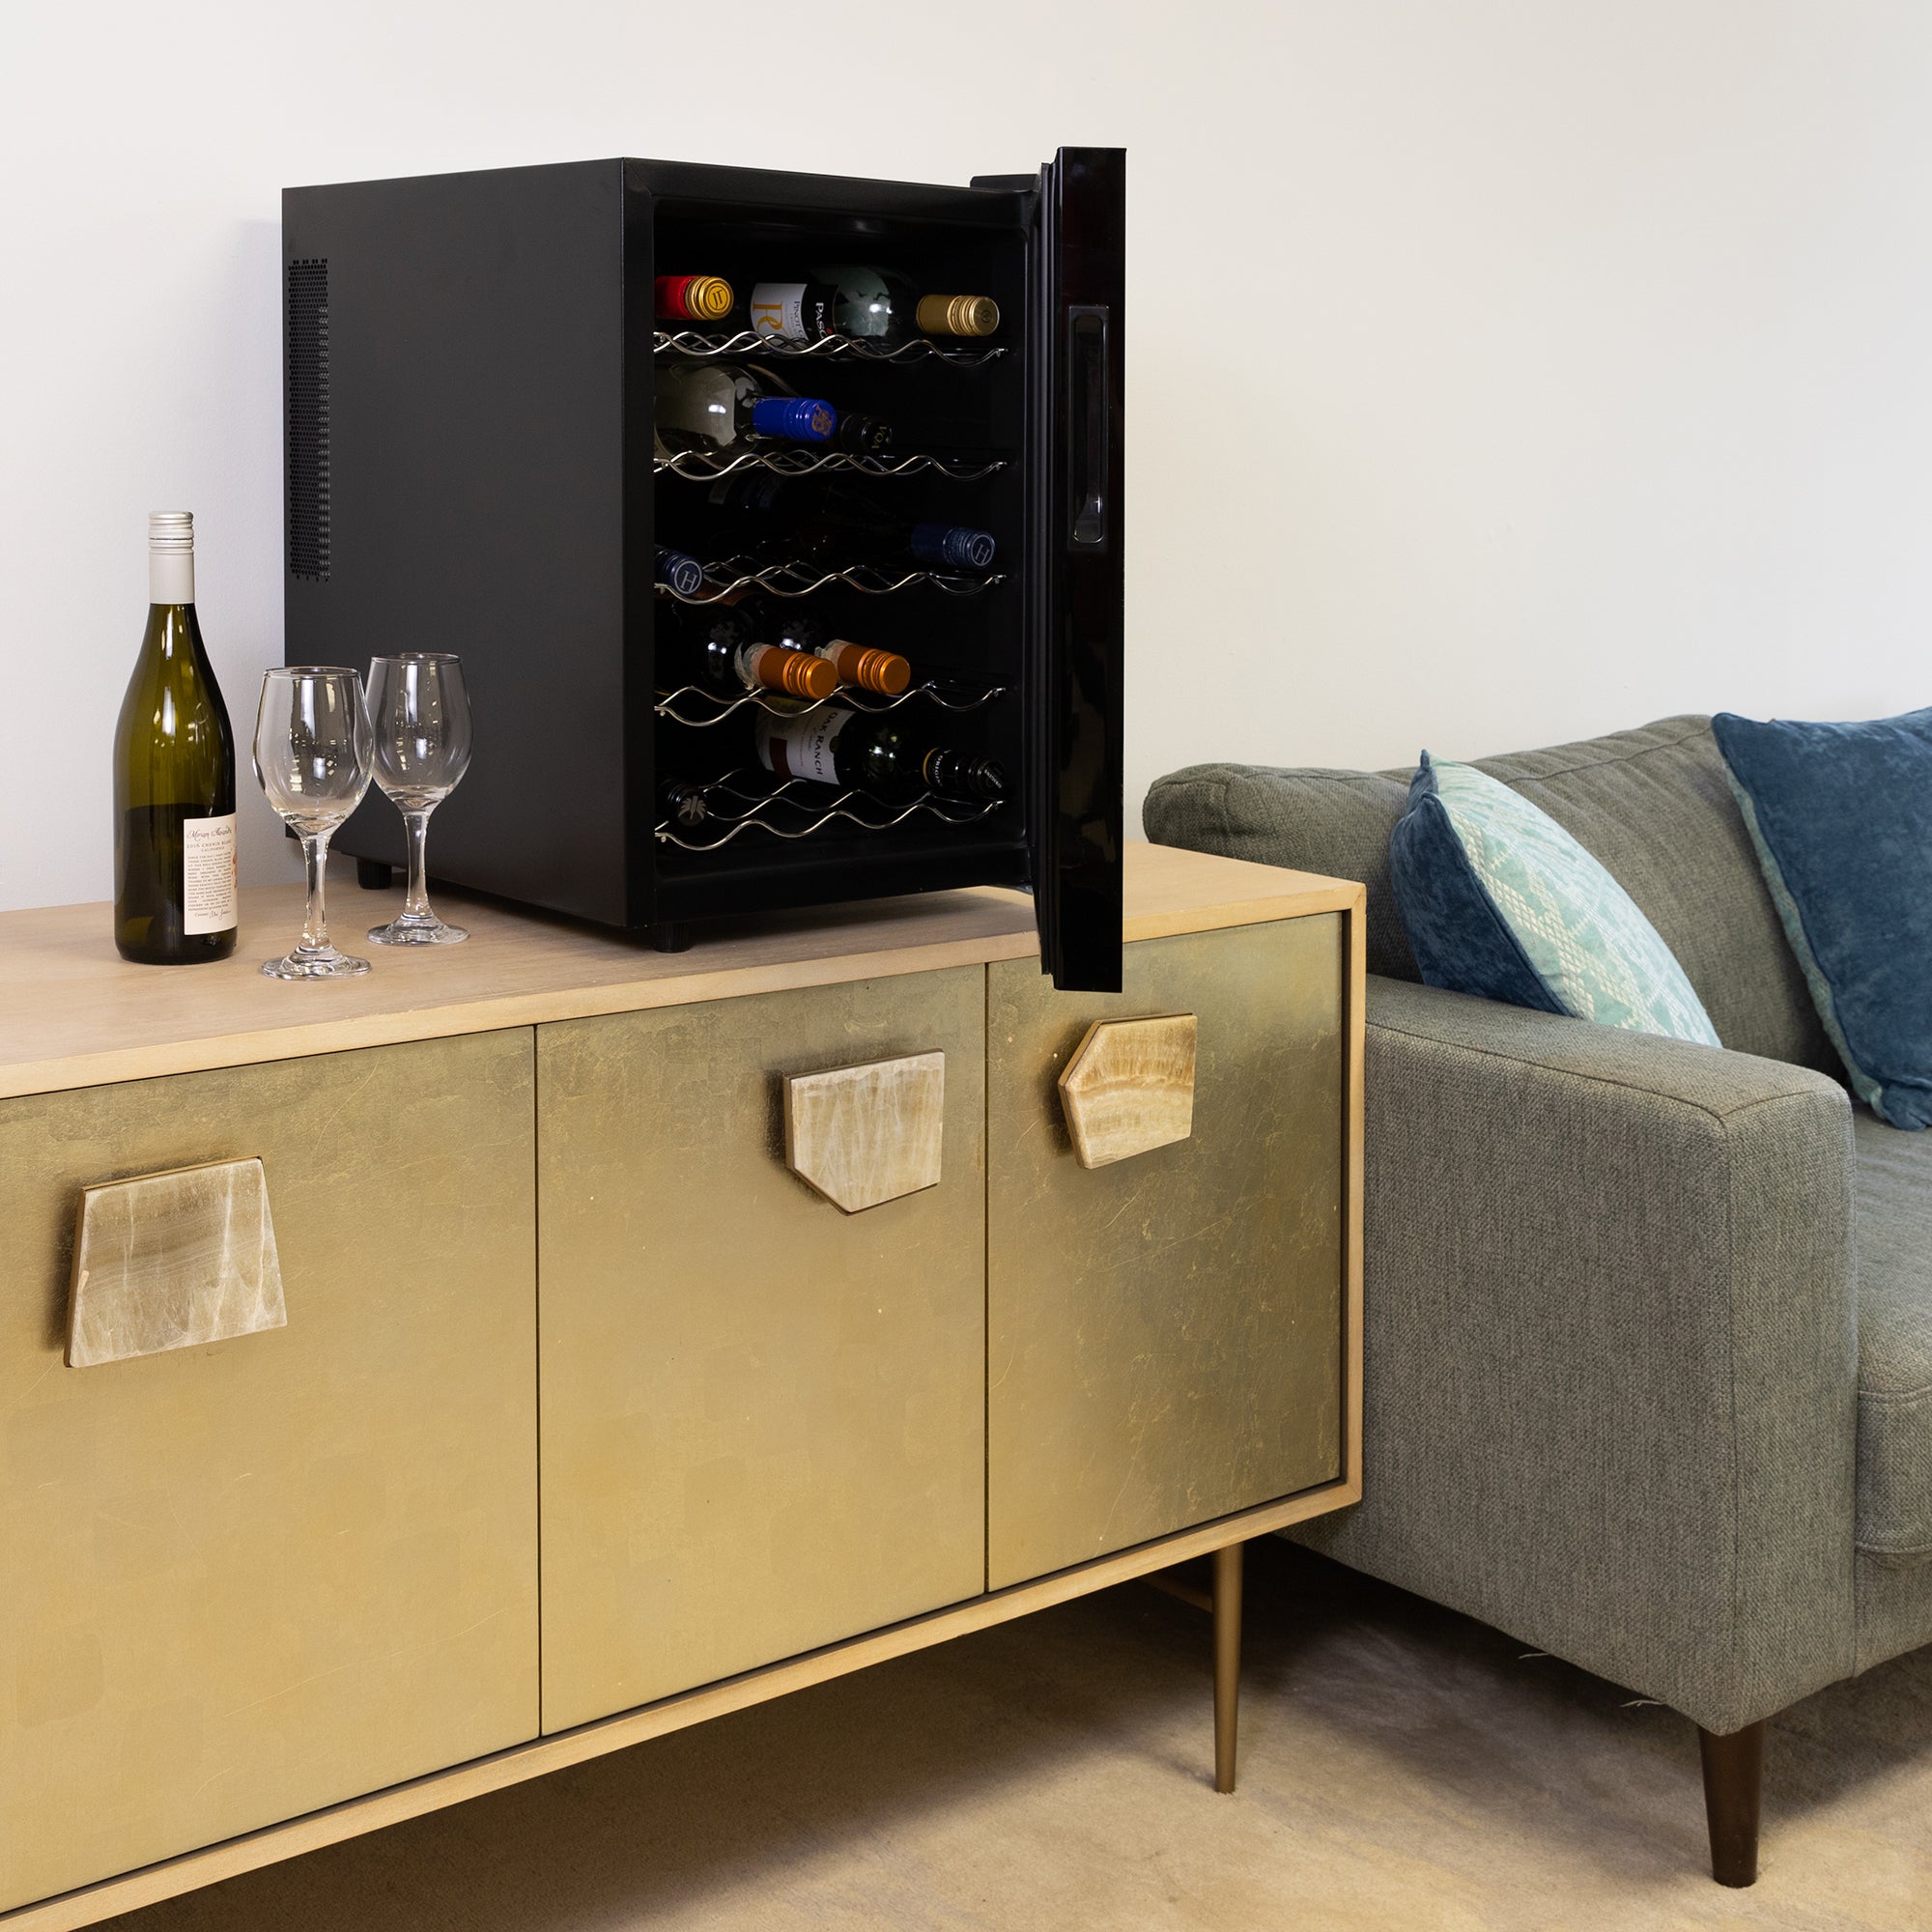 Koolatron 20 bottle wine cooler, open and filled with bottles of wine, on a gold-coloured sideboard with a bottle of wine and one glass beside it